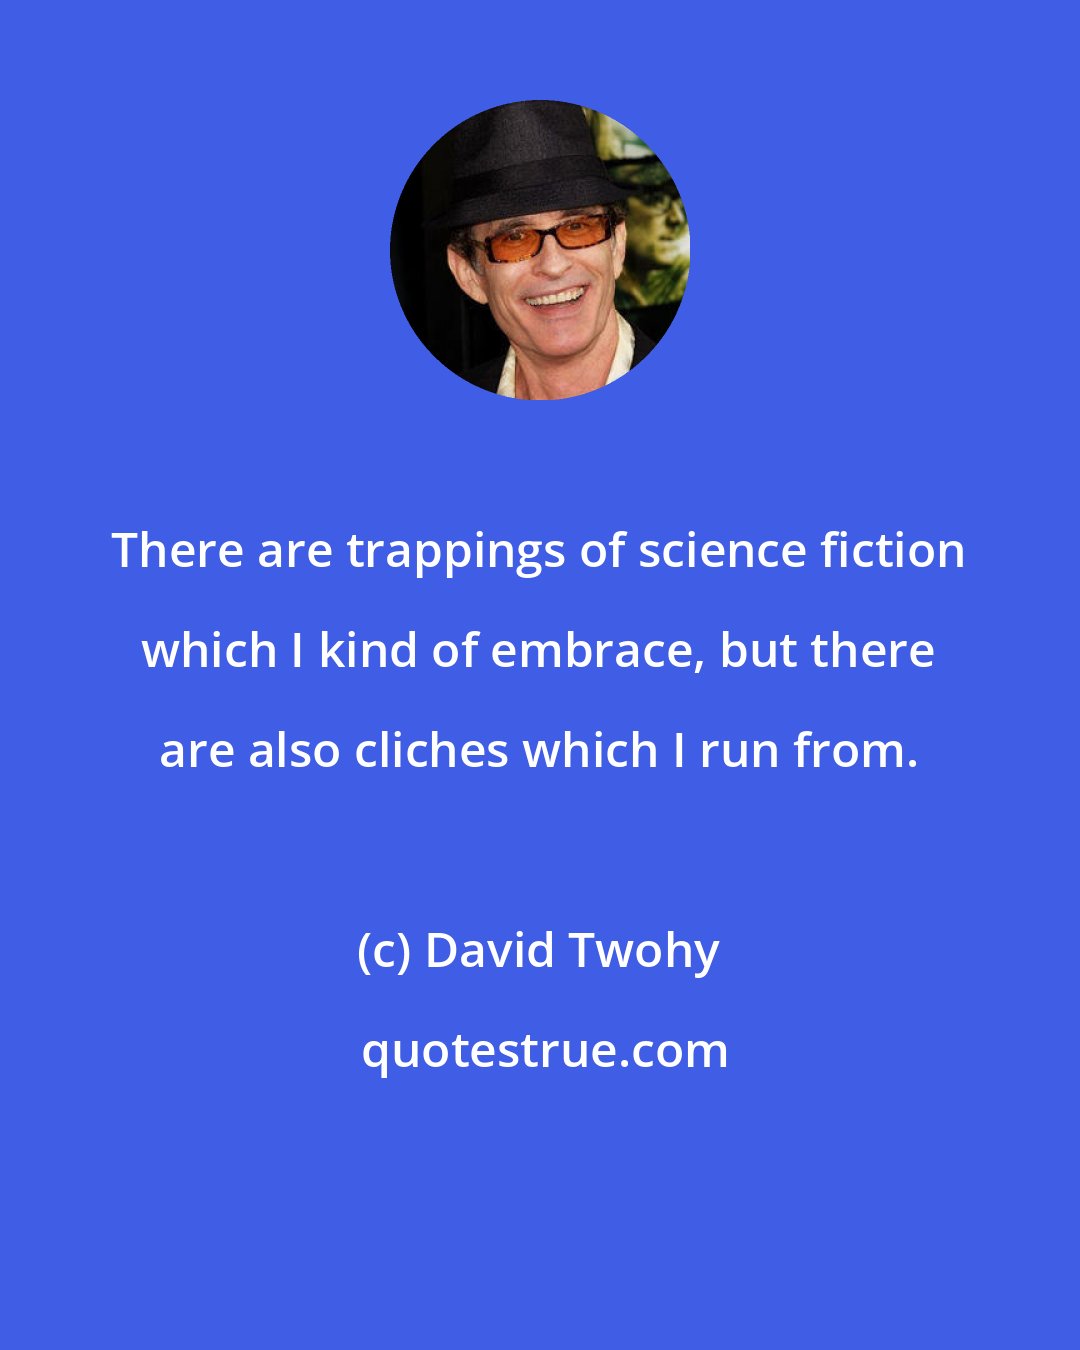 David Twohy: There are trappings of science fiction which I kind of embrace, but there are also cliches which I run from.